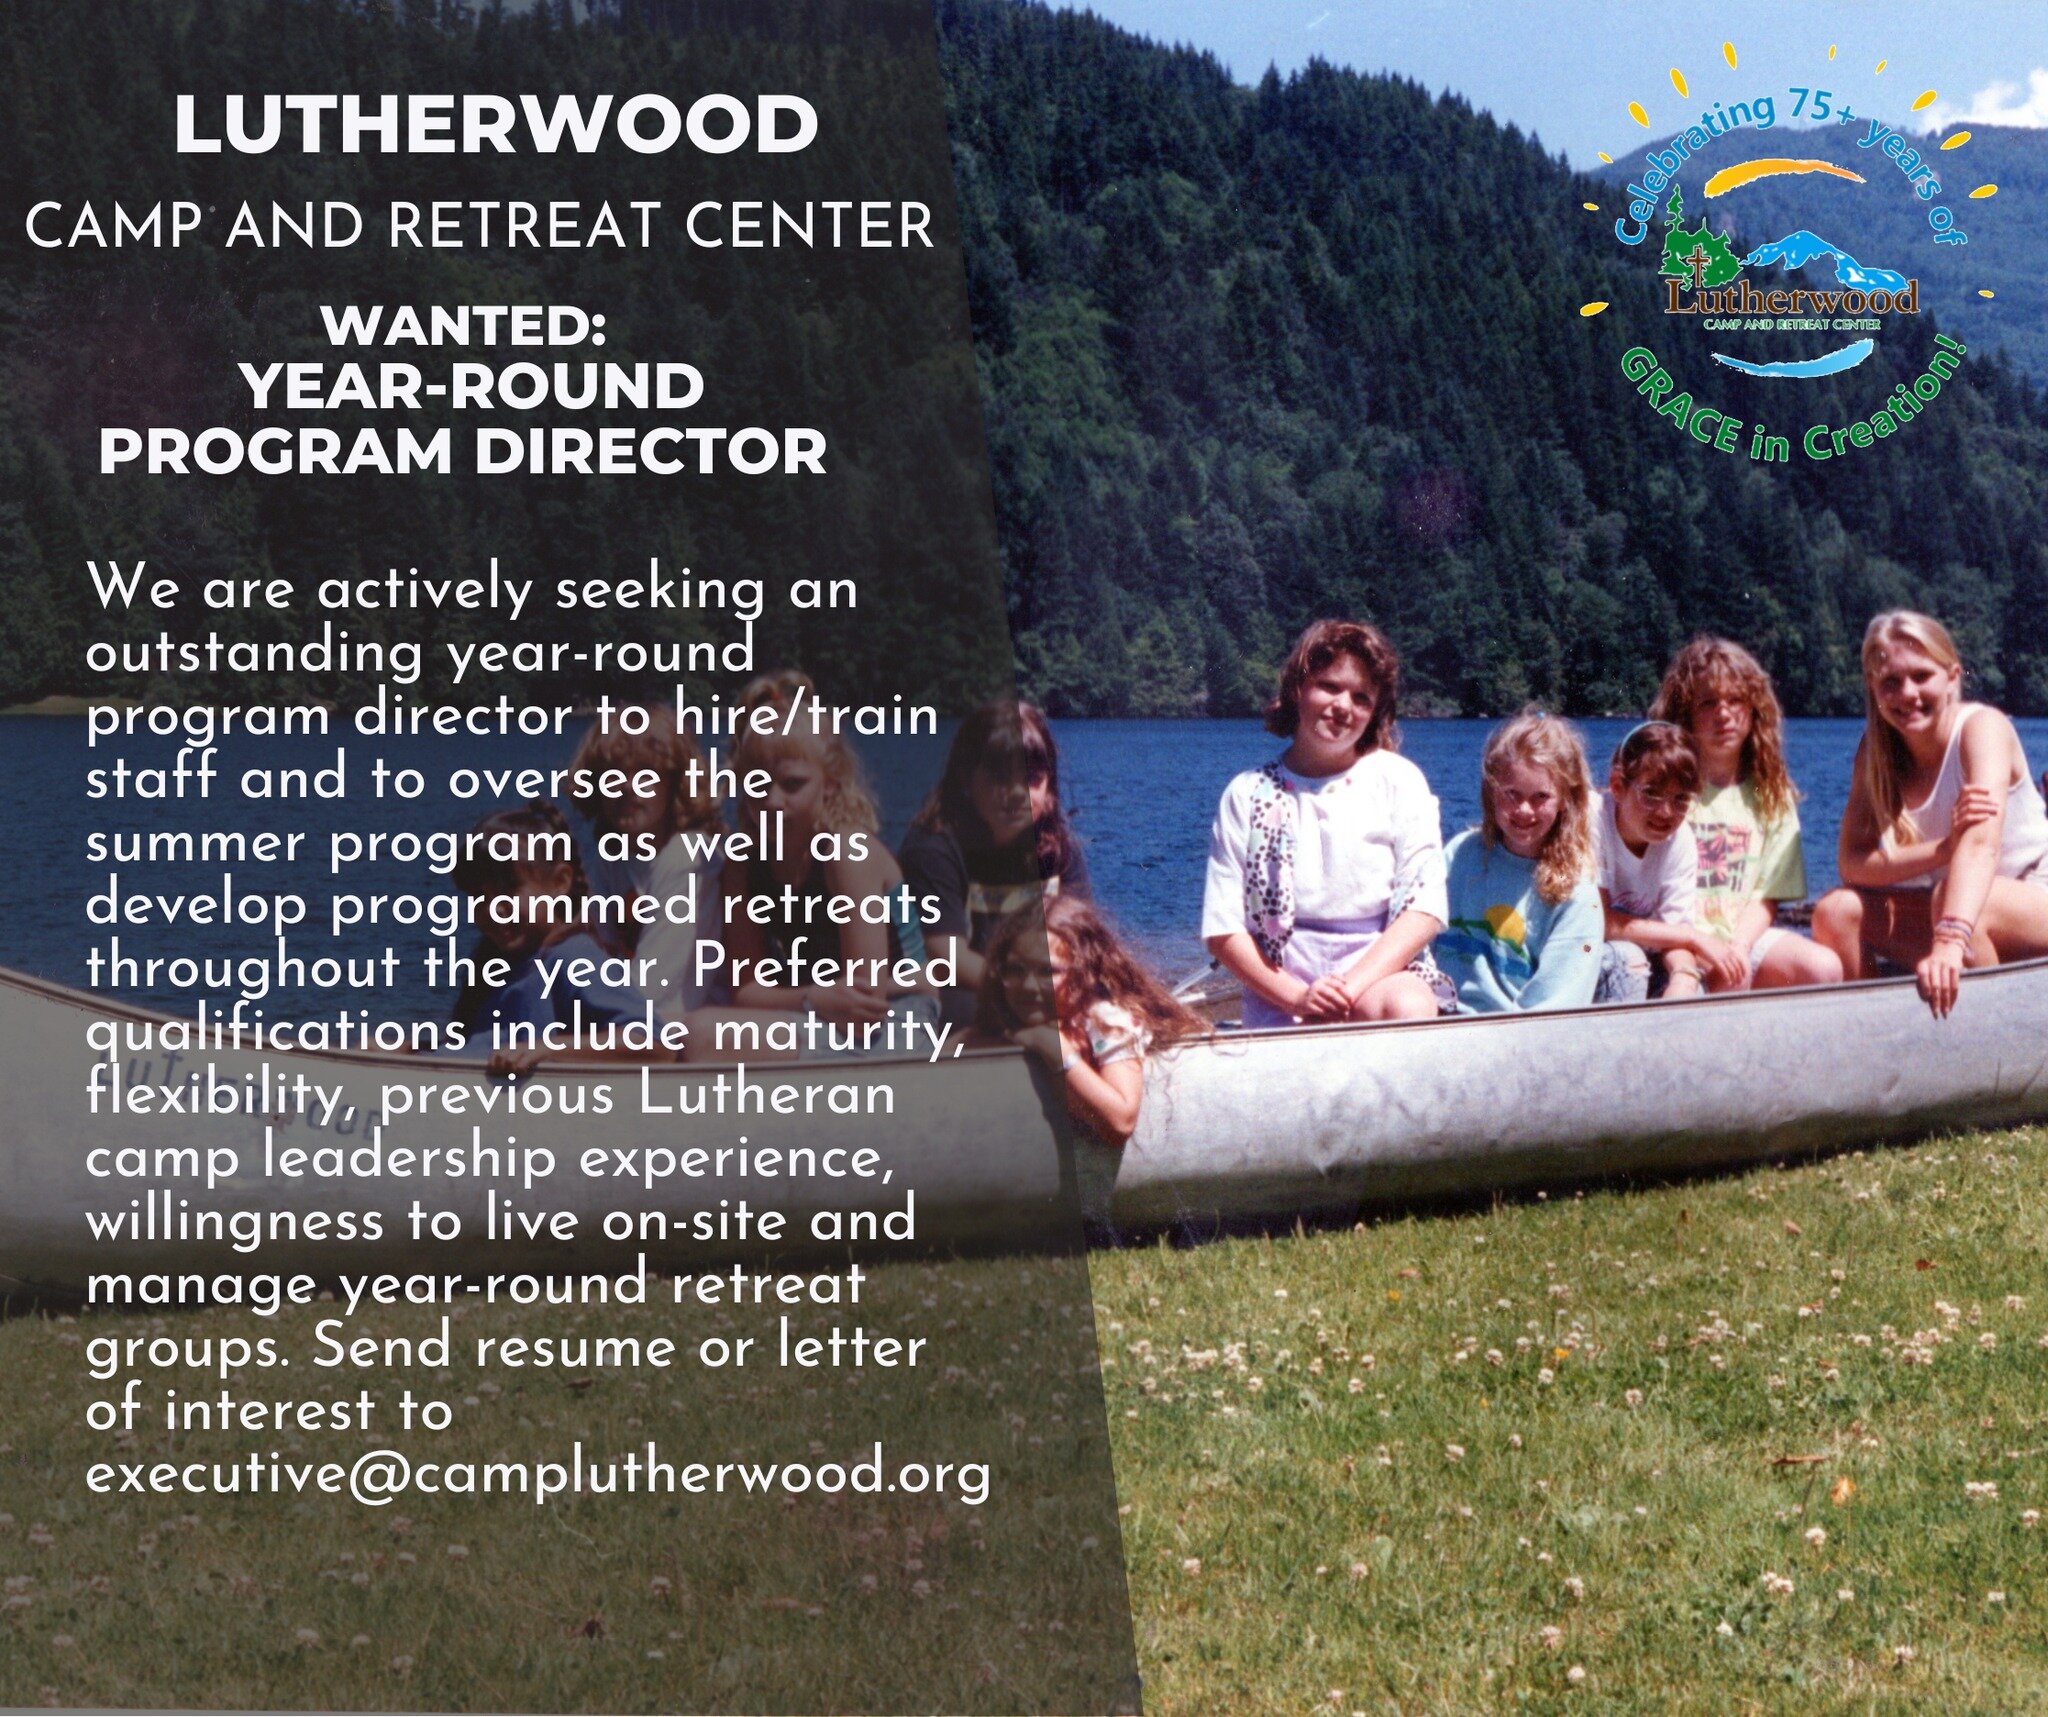 Send resume or letter of interest to executive@camplutherwood.org. #job #programdirector #summercamp #hiringnow